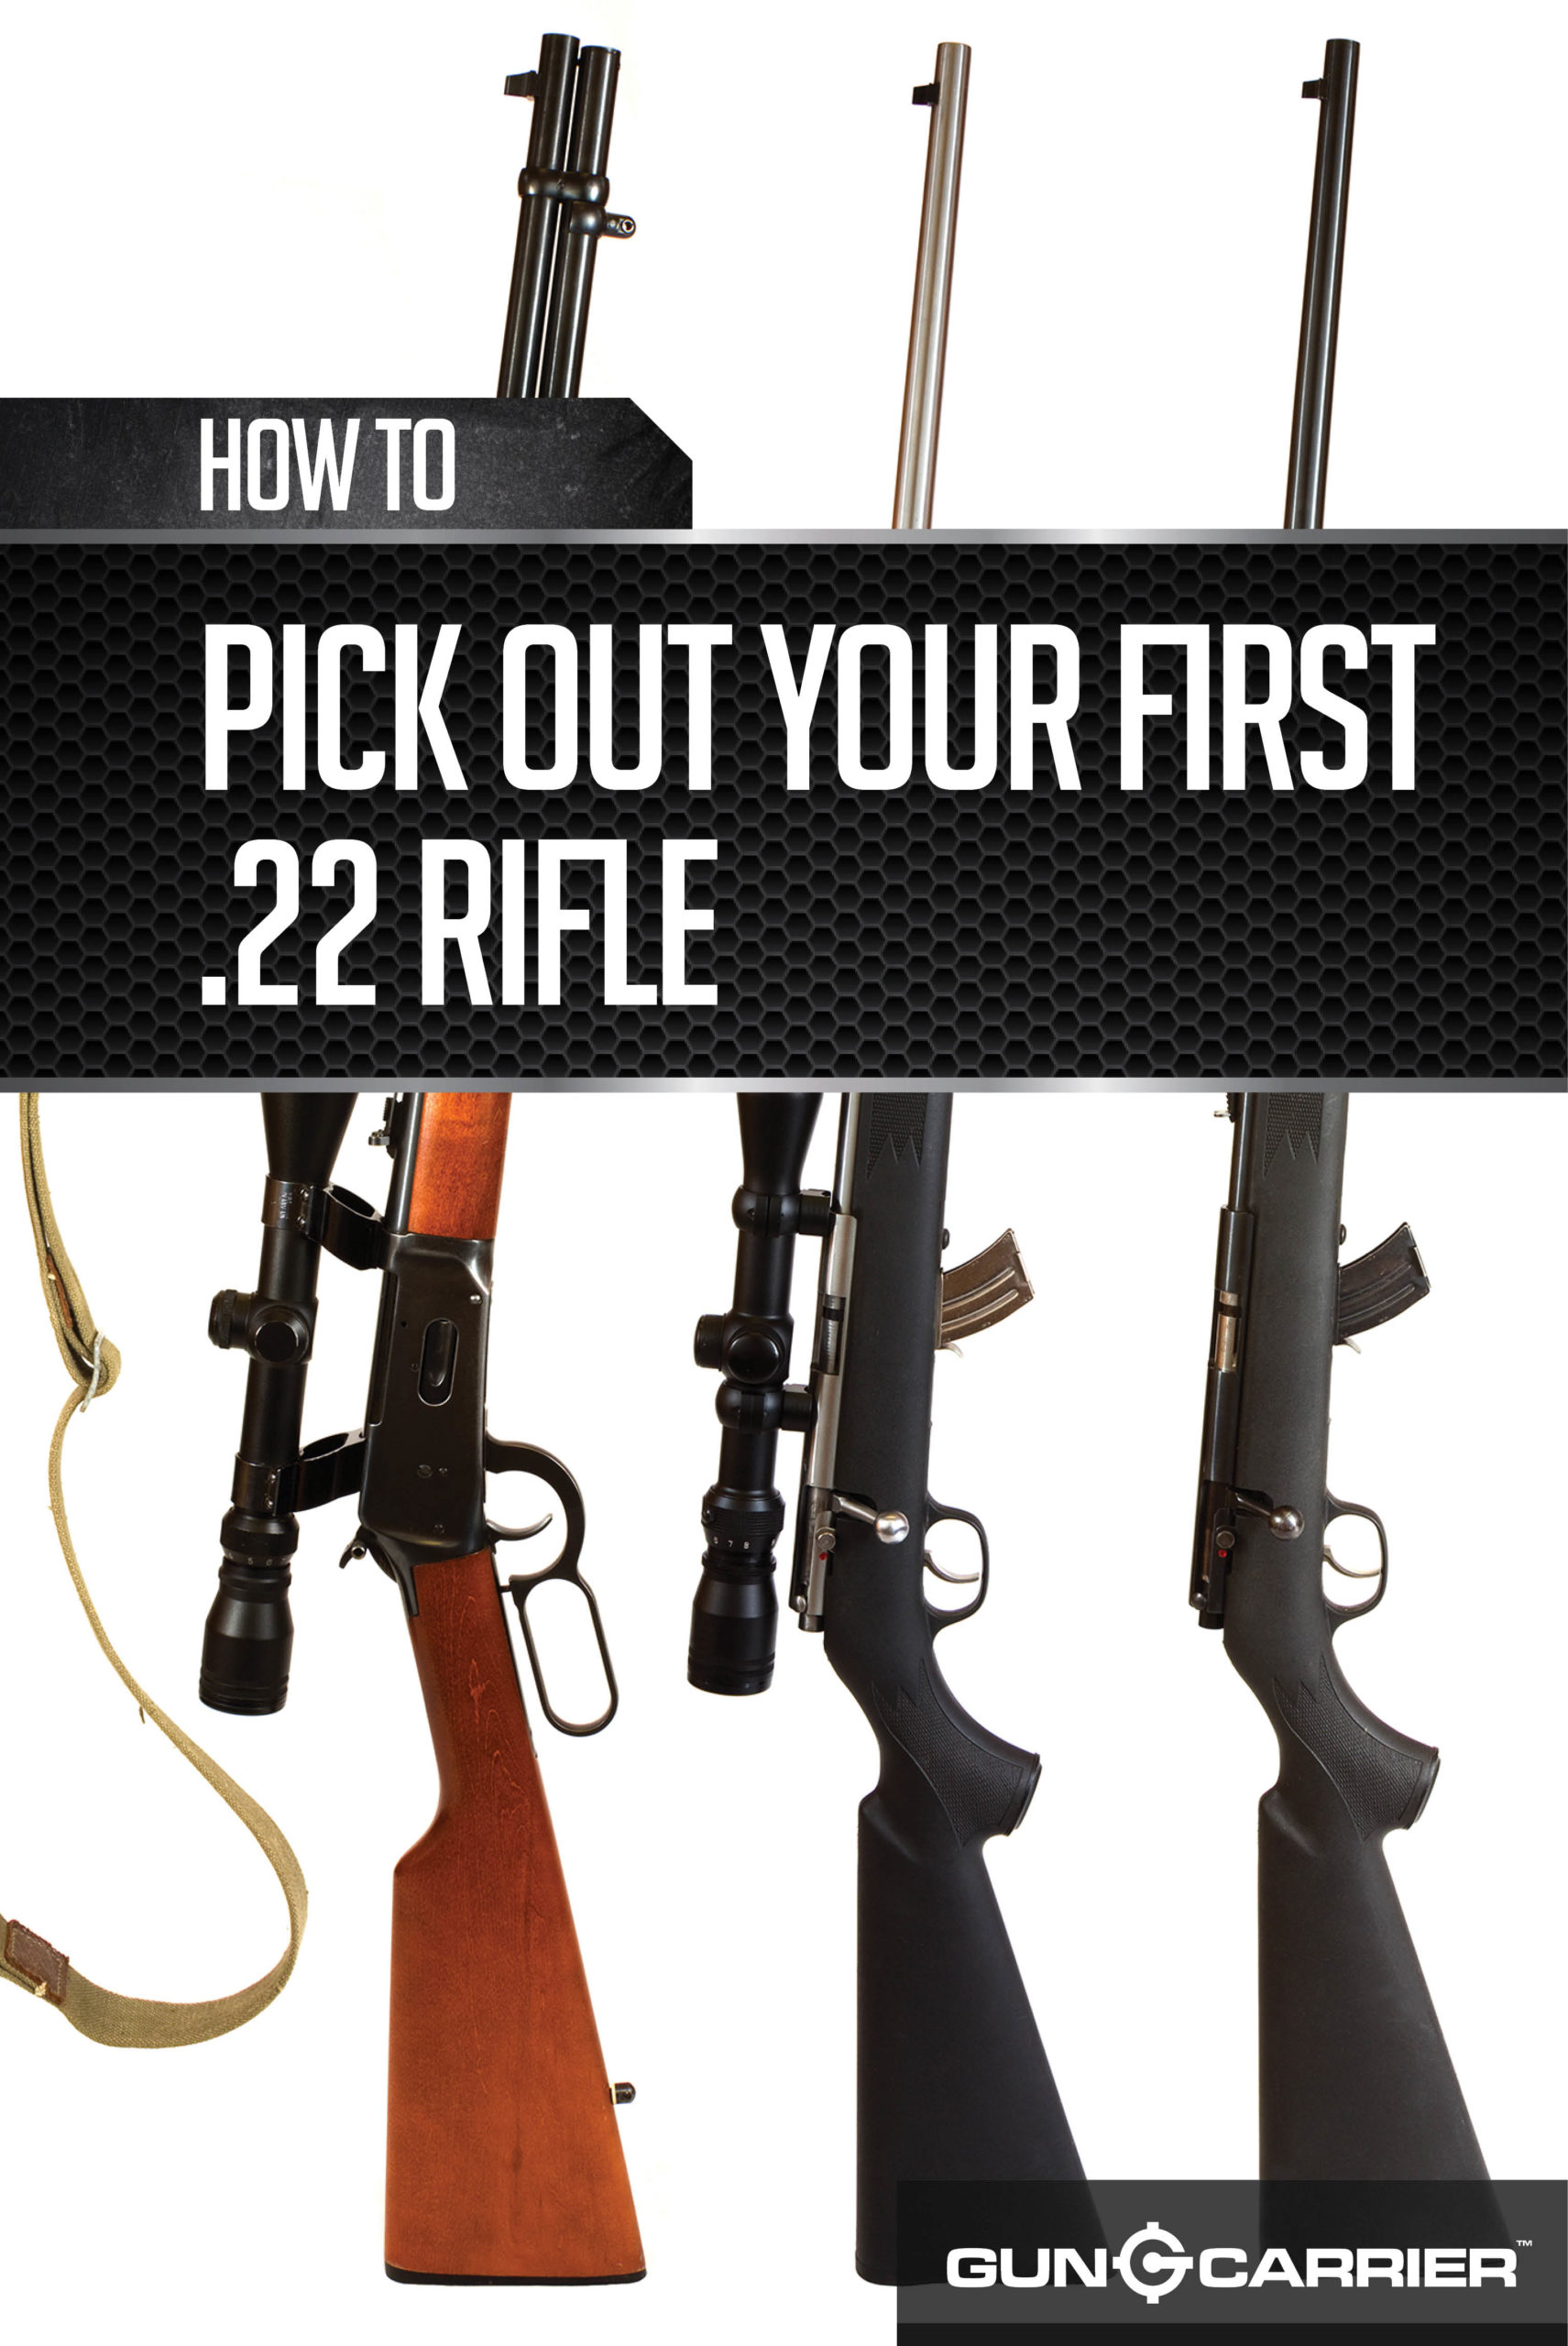 Picking your First 22 Rifle by Gun Carrier at https://guncarriernews.wpengine.com/picking-your-first-22-rifle/